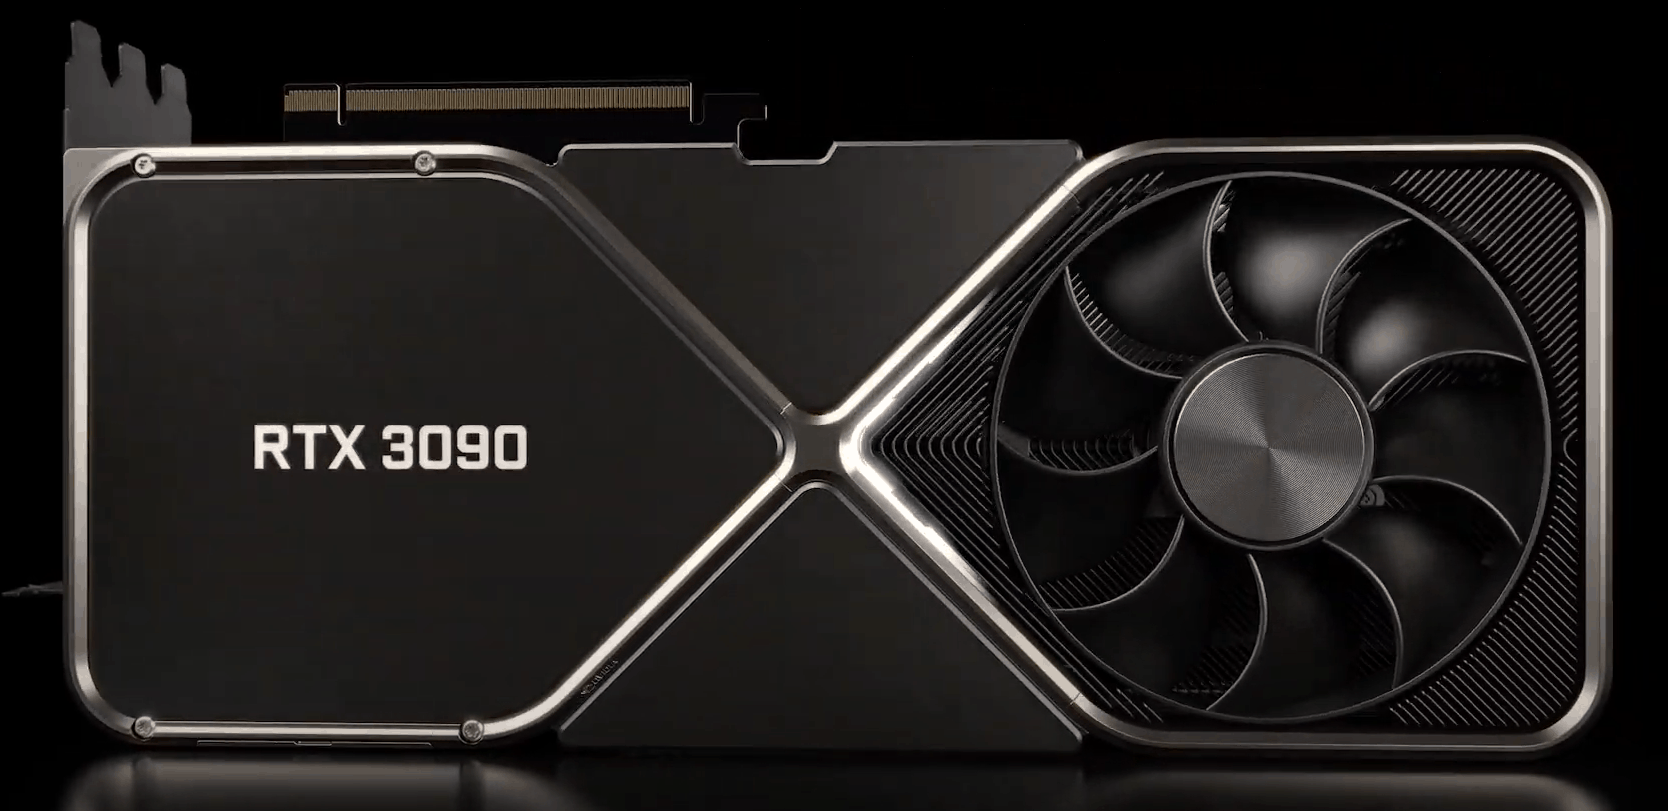 The Best Nvidia 3090 Graphics Card In 2021 - PC Guide